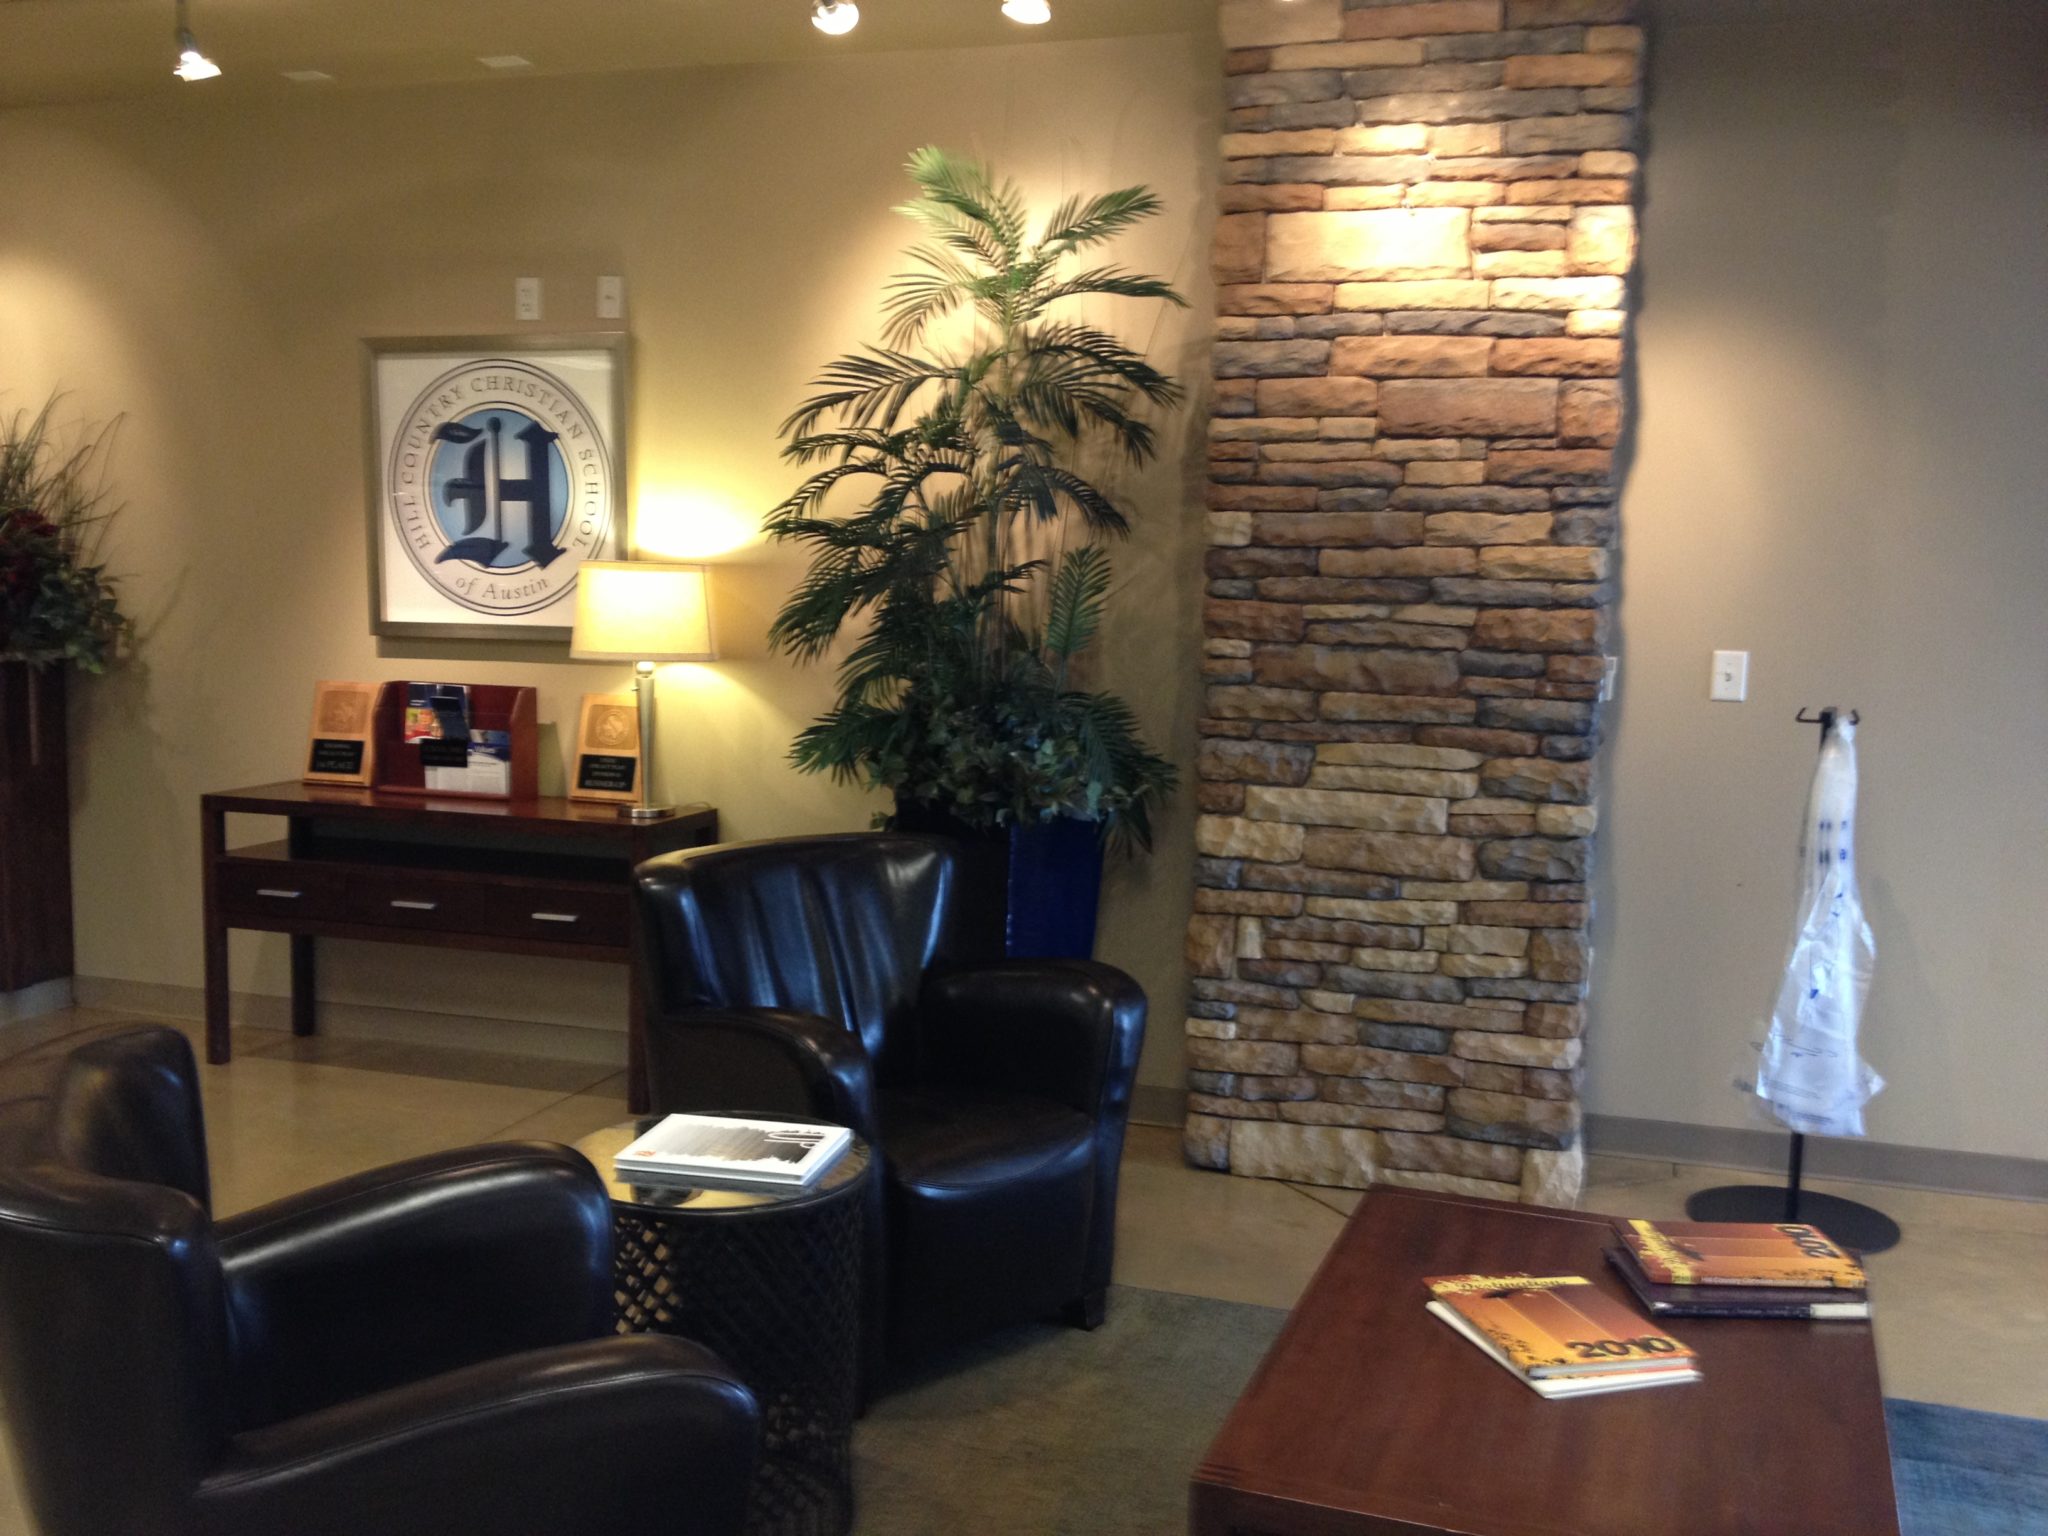 Entrance Lobby at Hill Country Christian School of Austin